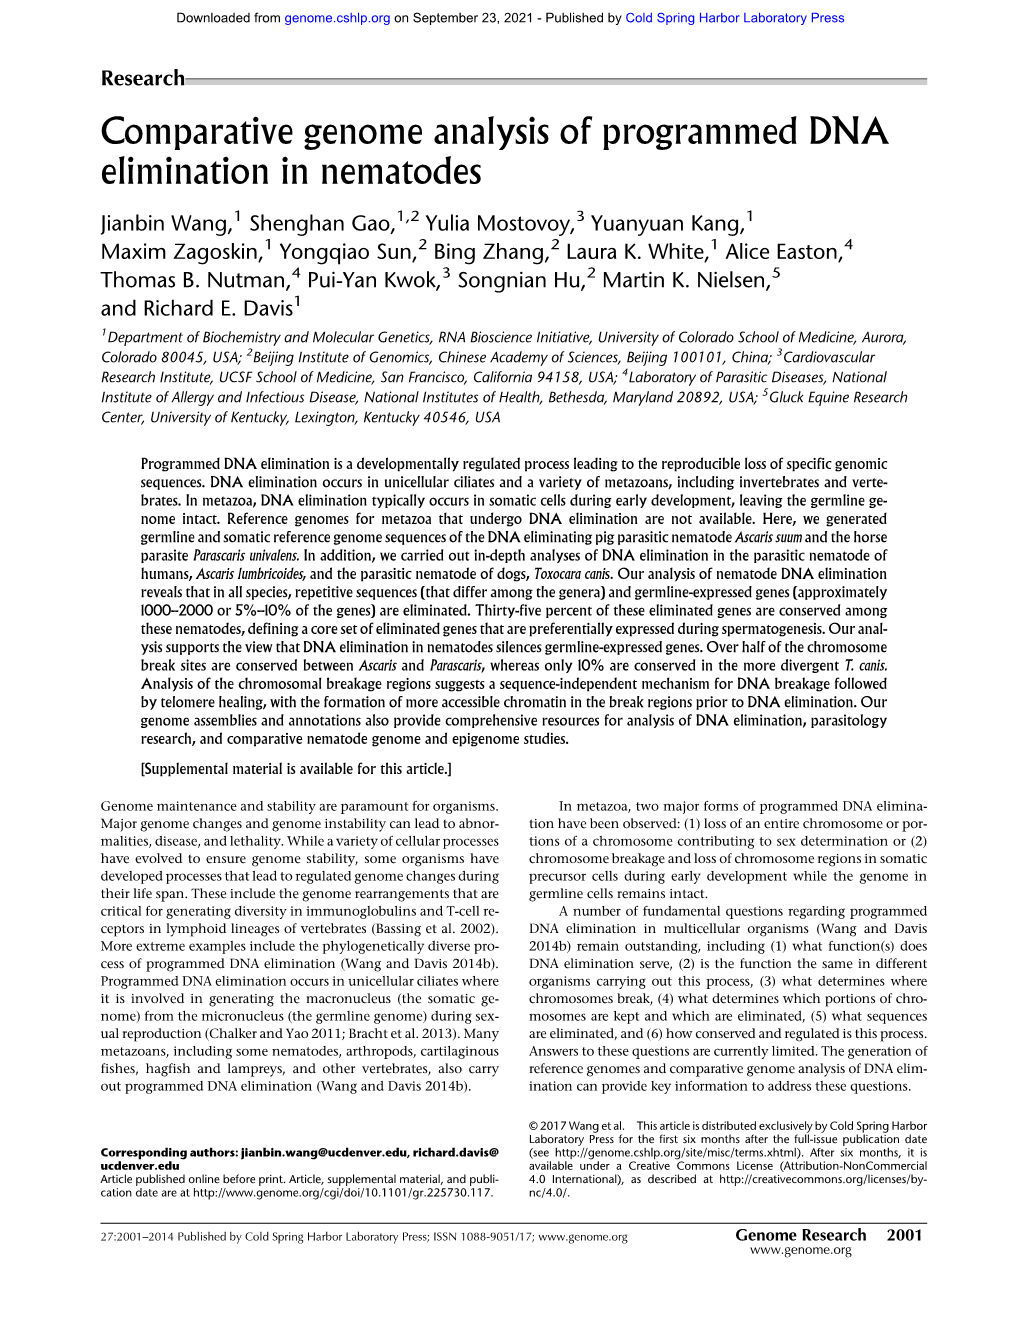 Comparative Genome Analysis of Programmed DNA Elimination in Nematodes